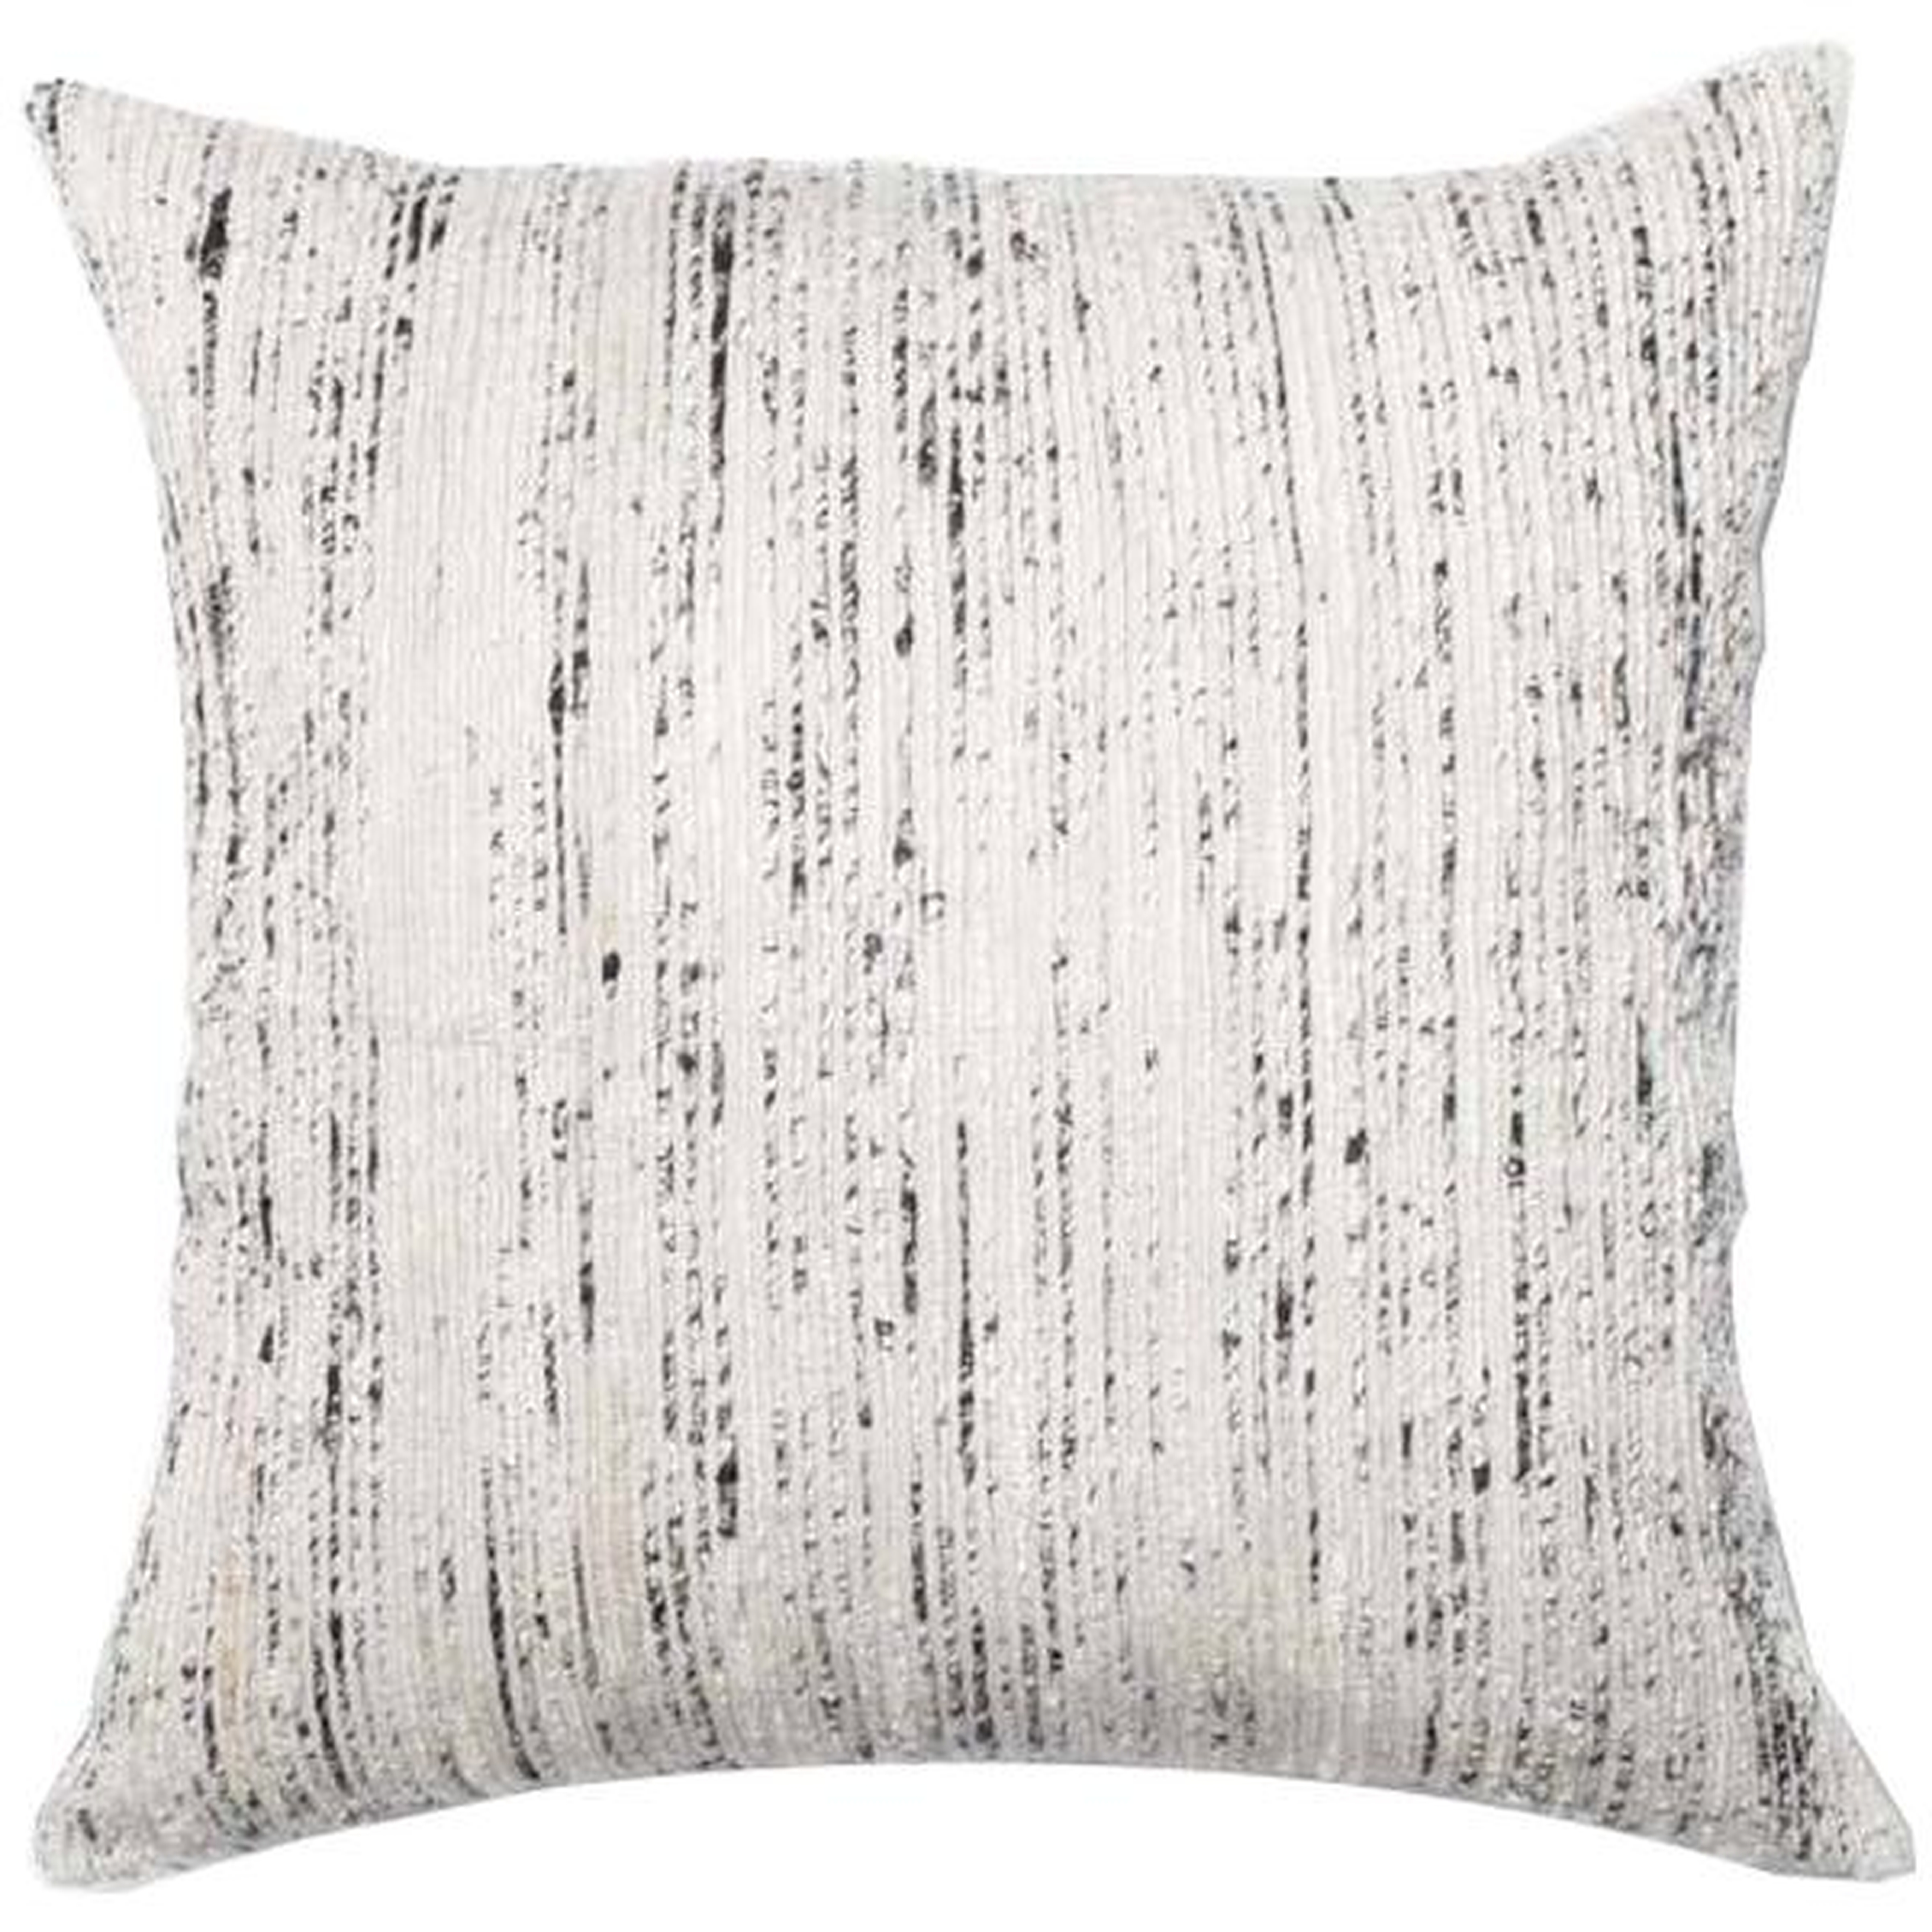 Woven Throw Pillow, 22" x 22", Gray / polyfilled - Loma Threads